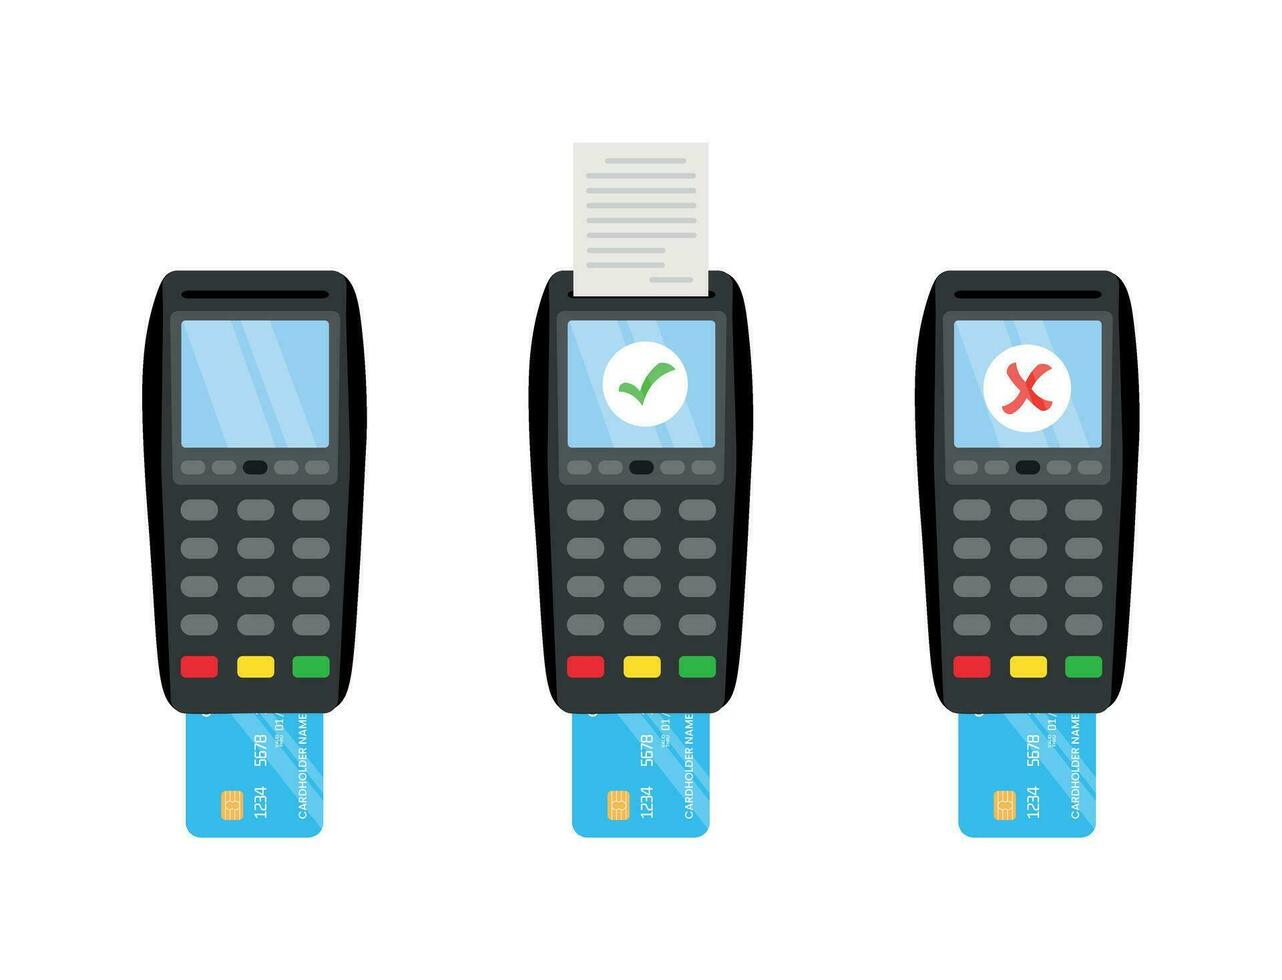 Concept of approved and refused credit card payment POS terminal vector